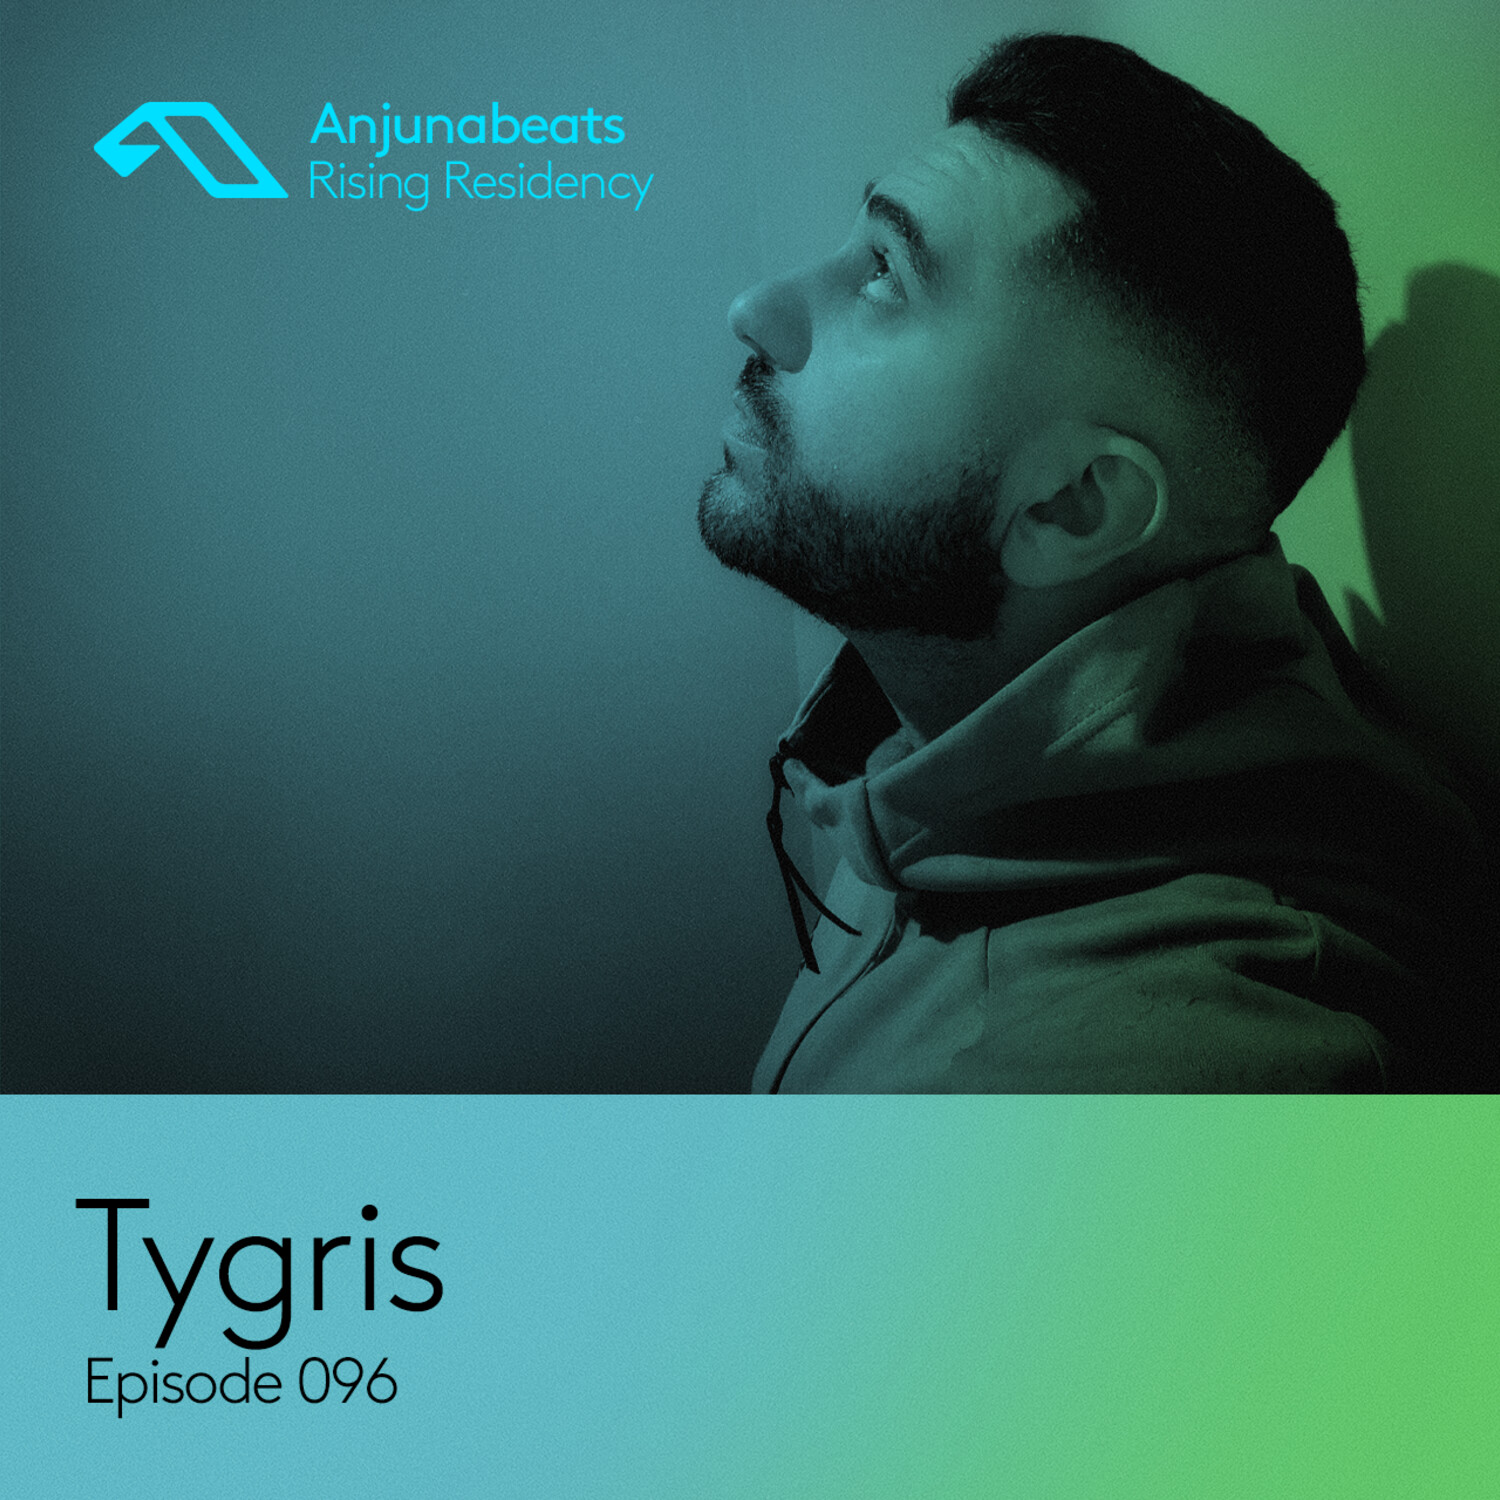 The Anjunabeats Rising Residency 096 with Tygris